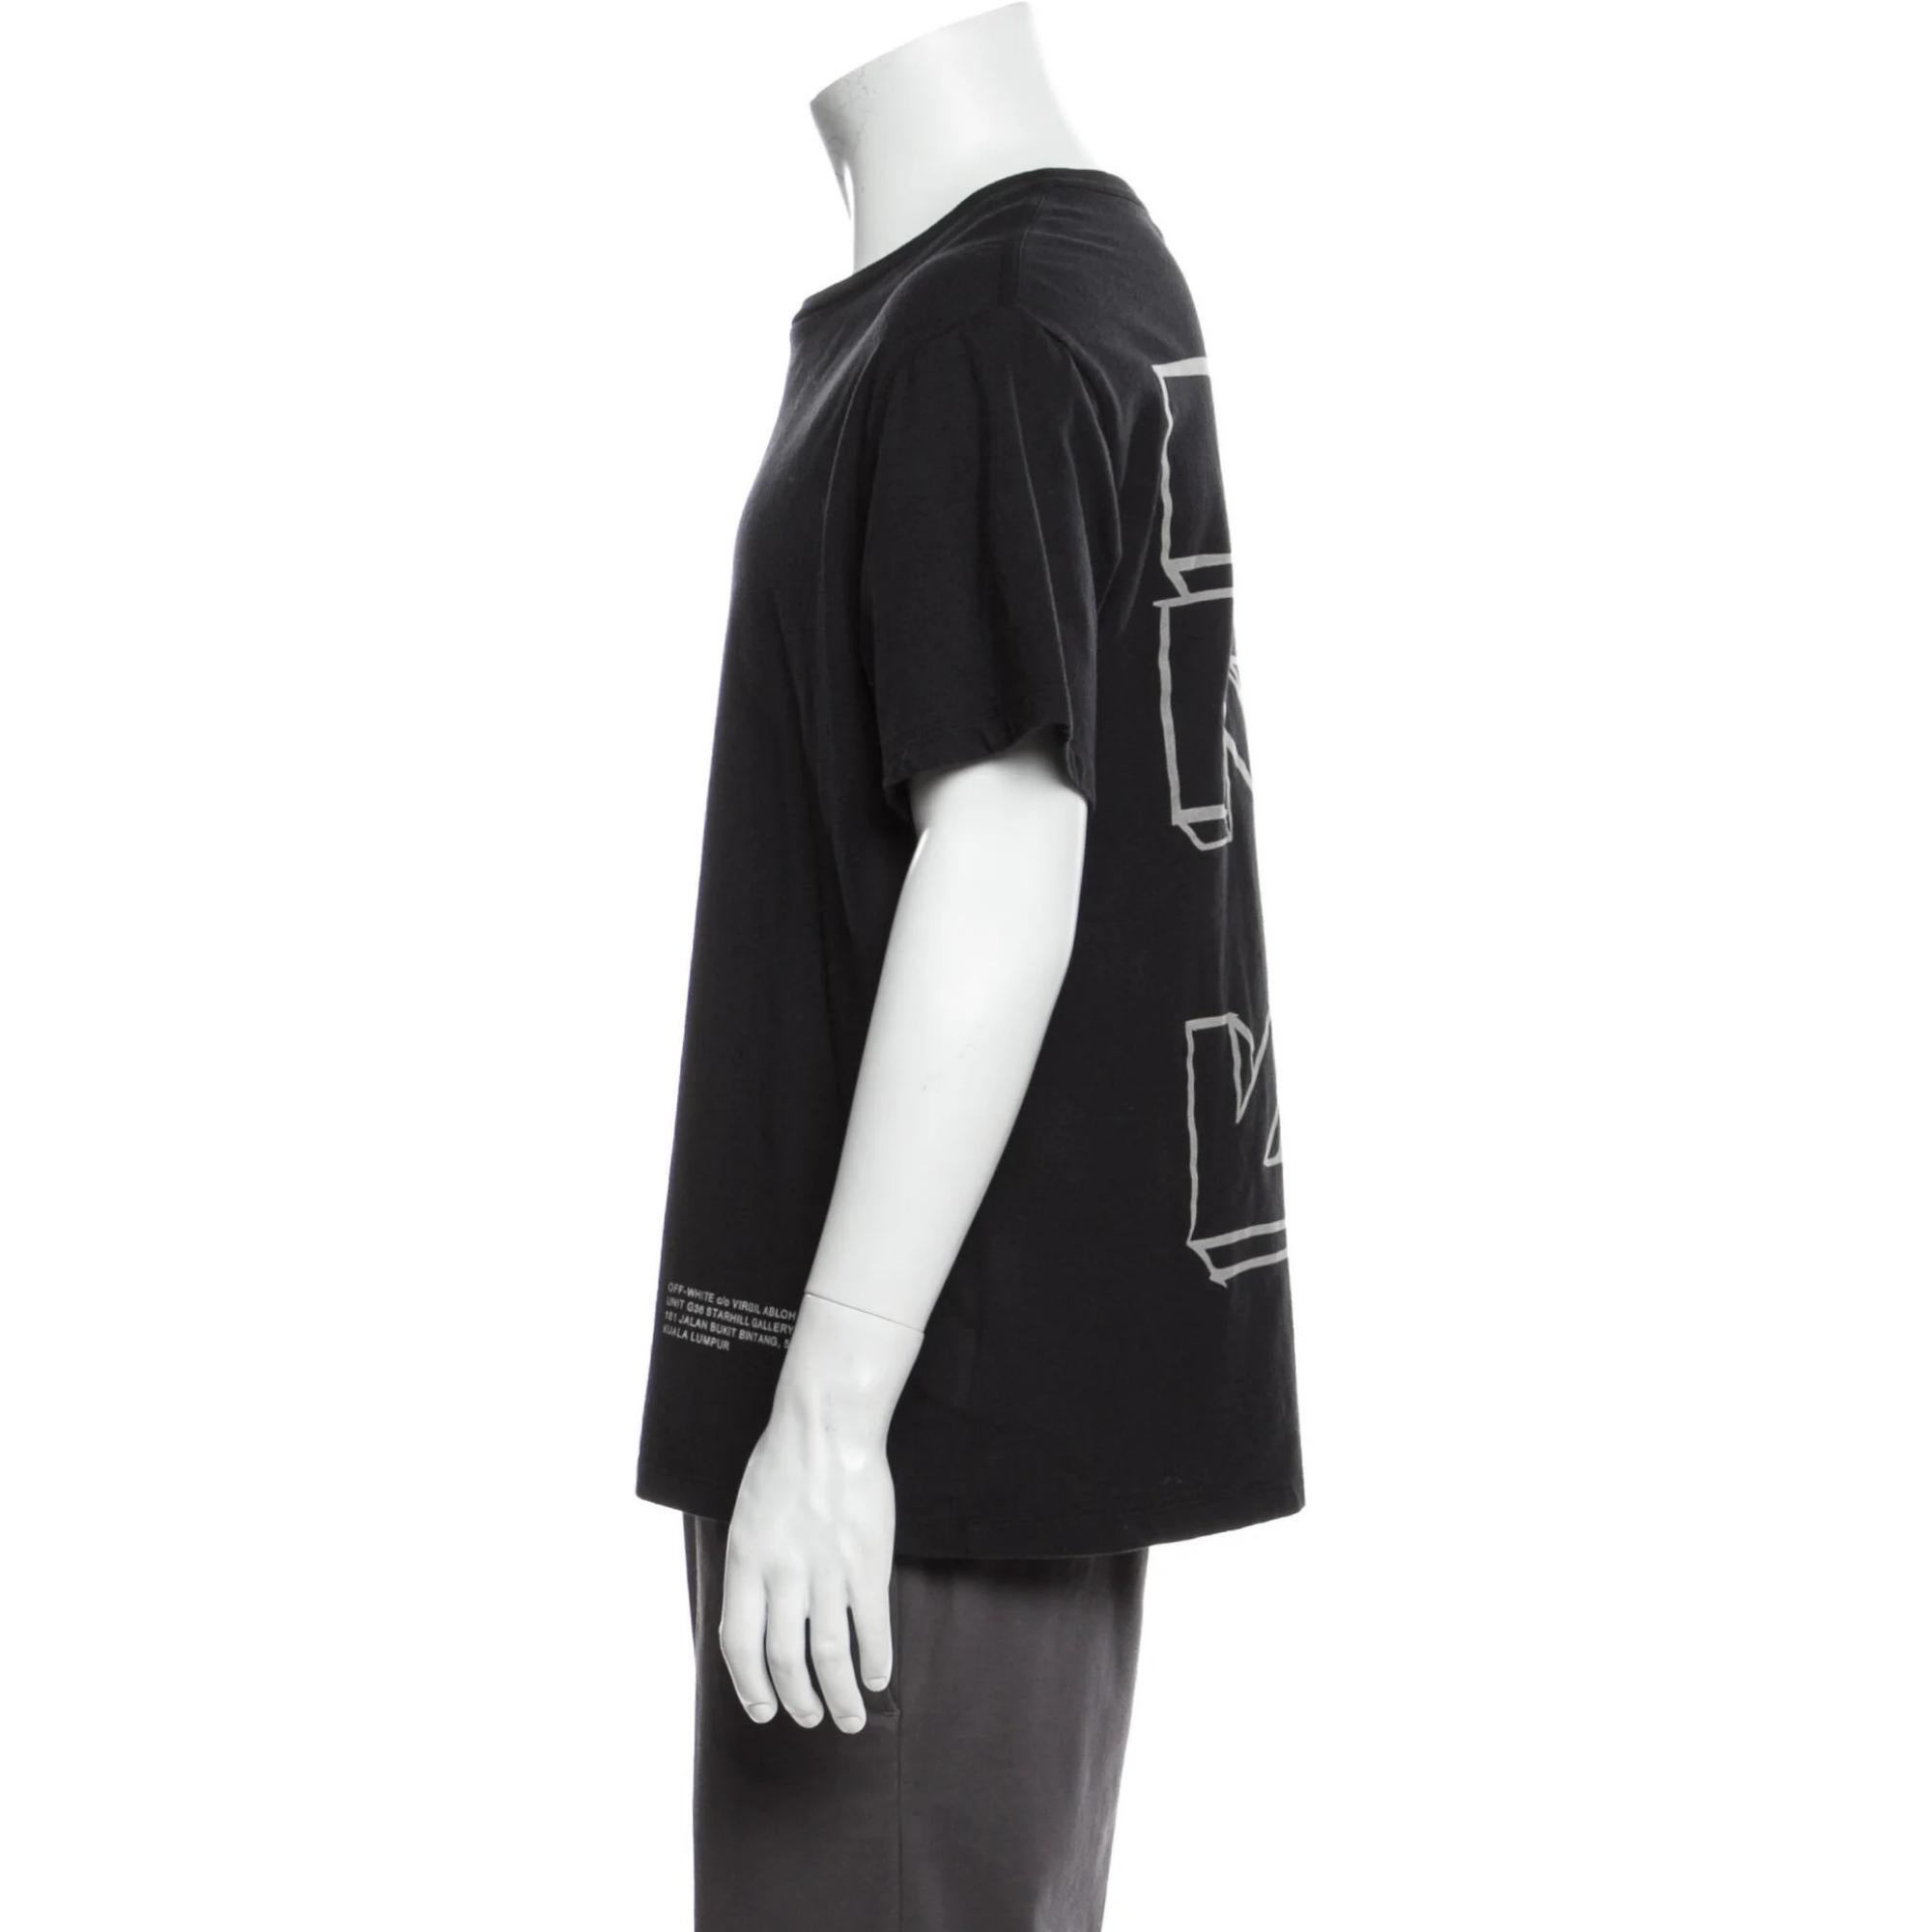 Off-White c/o Virgil Abloh T-Shirt. From the Spring 2018 Collection by Virgil Abloh. Black. Graphic Print. Short Sleeve with Crew Neck.

COLOR: Black
MATERIAL: 100% Cotton; Combo 100% Polychloride
SIZE: Small
CONDITION: Very good